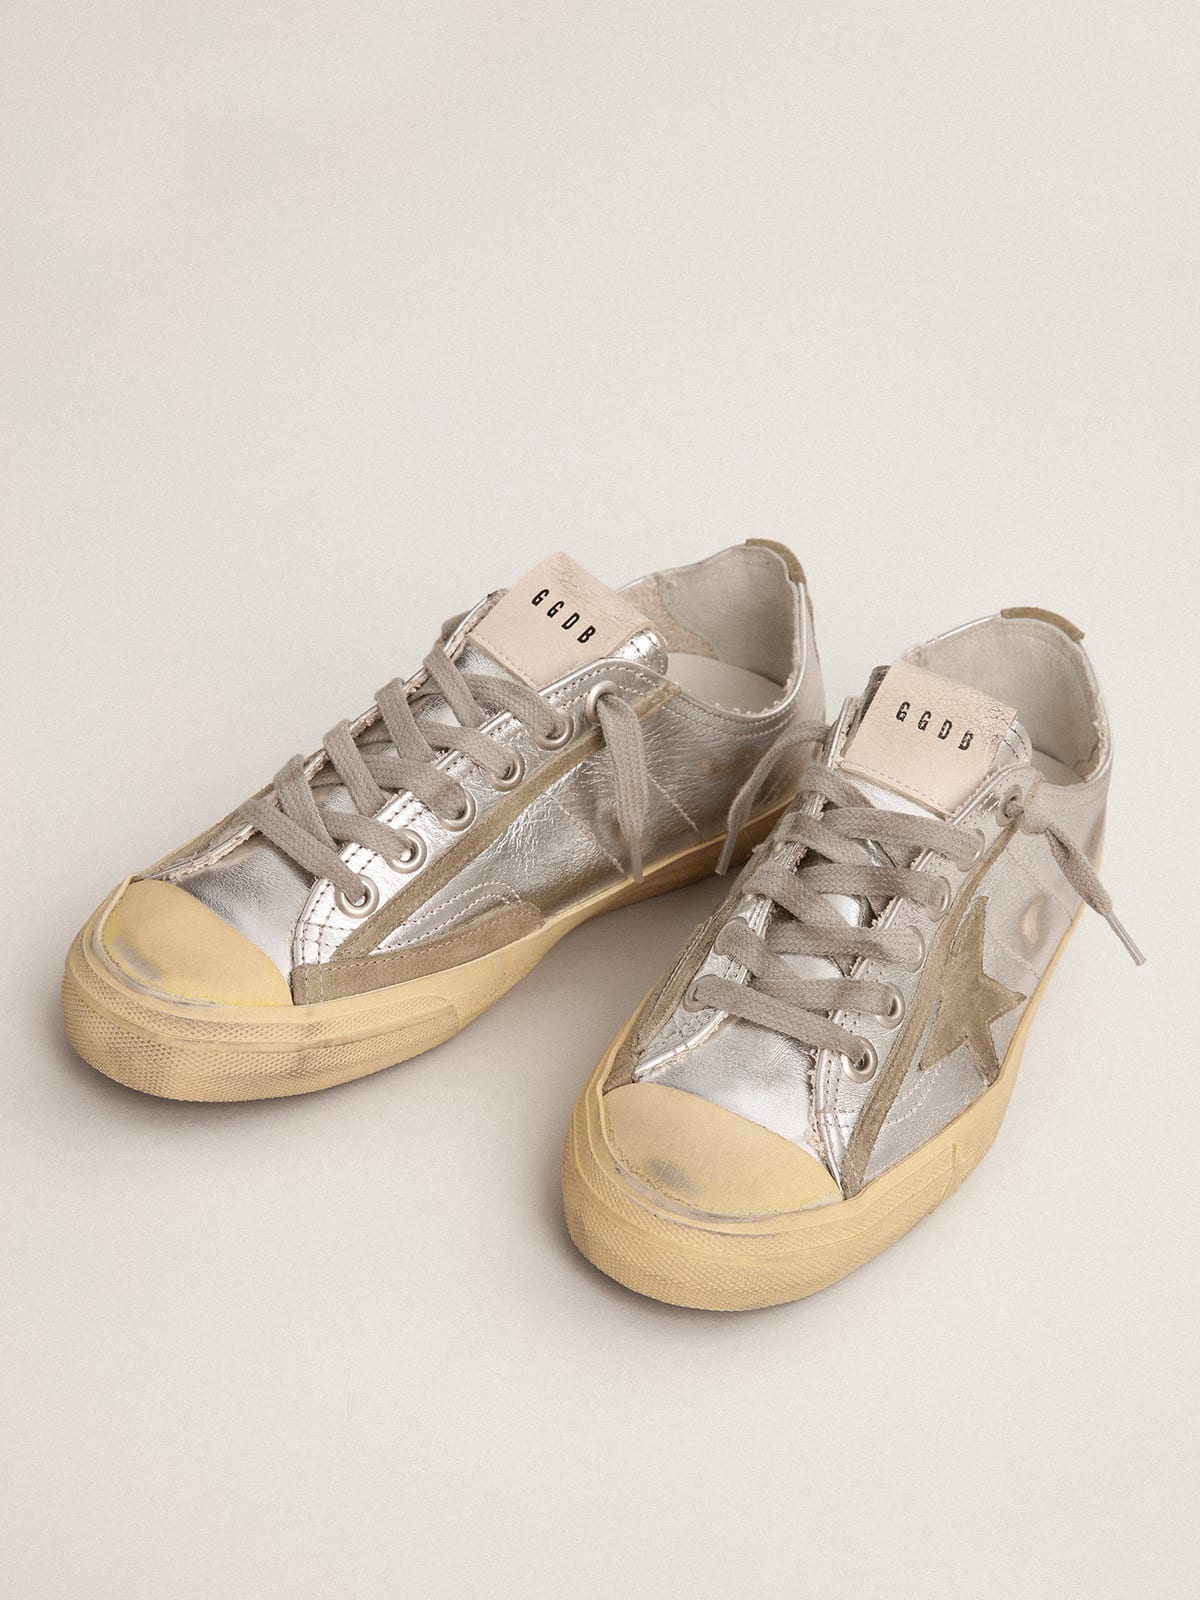 Golden Goose - V-Star LTD sneakers in silver metallic leather with star in ice-gray suede in 